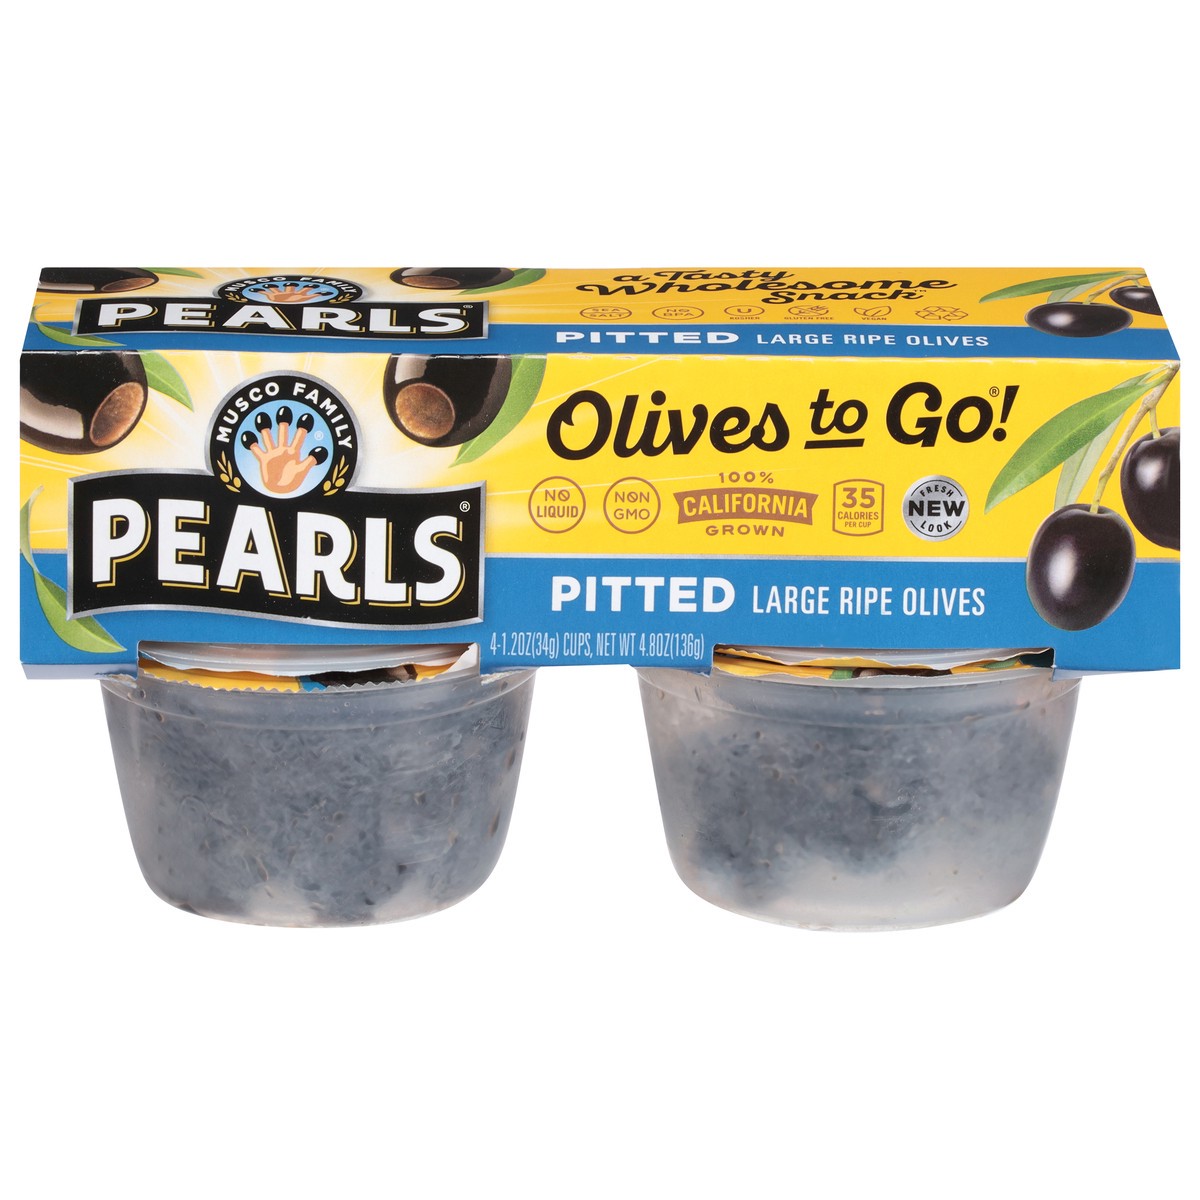 slide 1 of 9, Pearls Olives to Go Large Ripe Pitted Olives 4 - 1.2 oz Cups, 4 ct